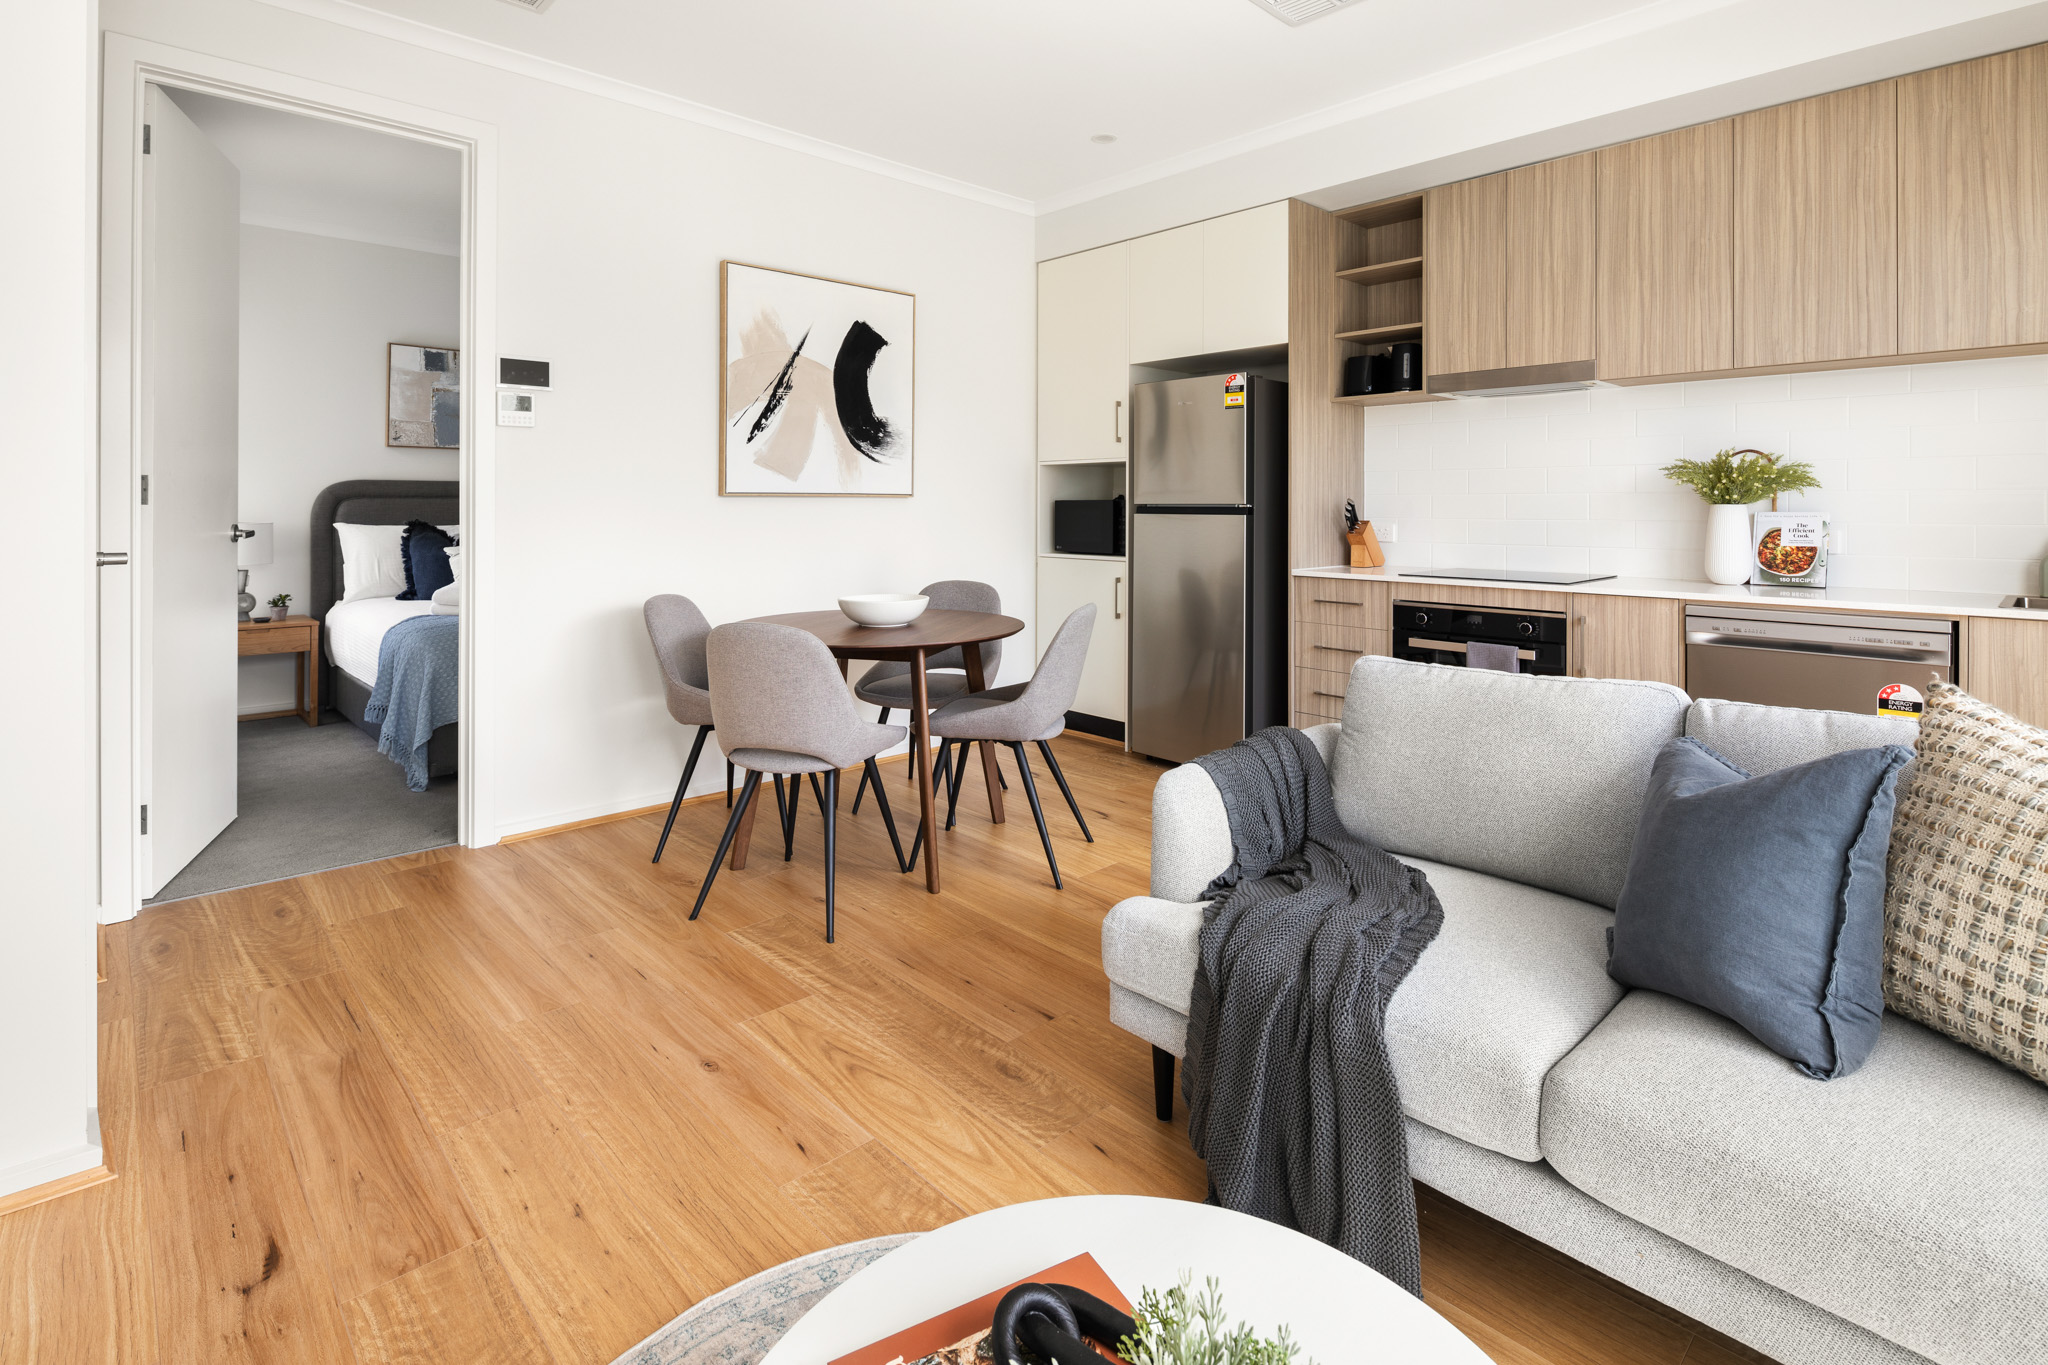 Living Area - Two Bedroom Apartment - Urban Rest - Clare Street Apartments - Port Adelaide